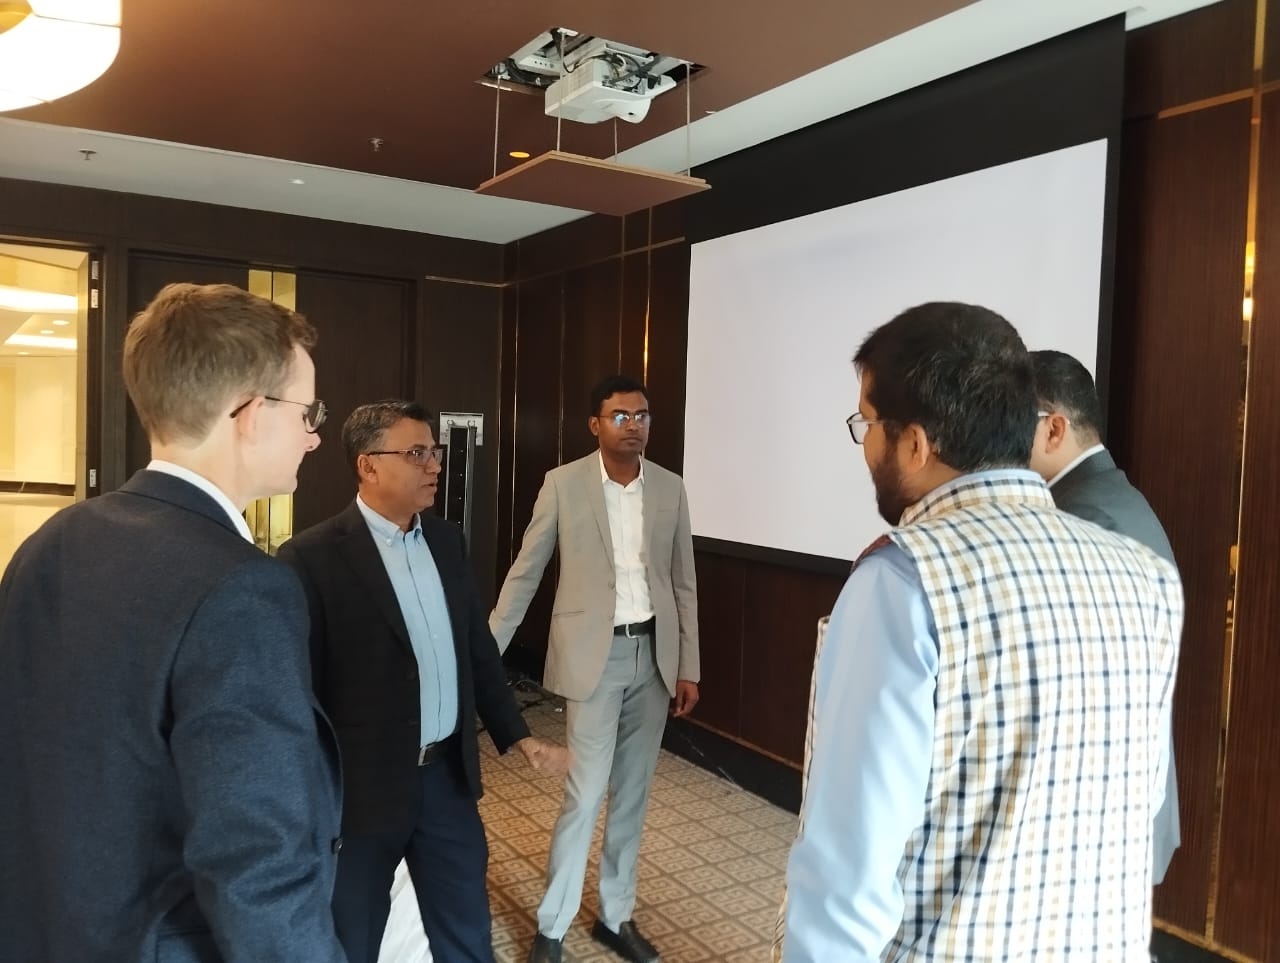 Bangladesh's First Blockchain Pilot Projects: World Bank Meeting with FAPAD officials